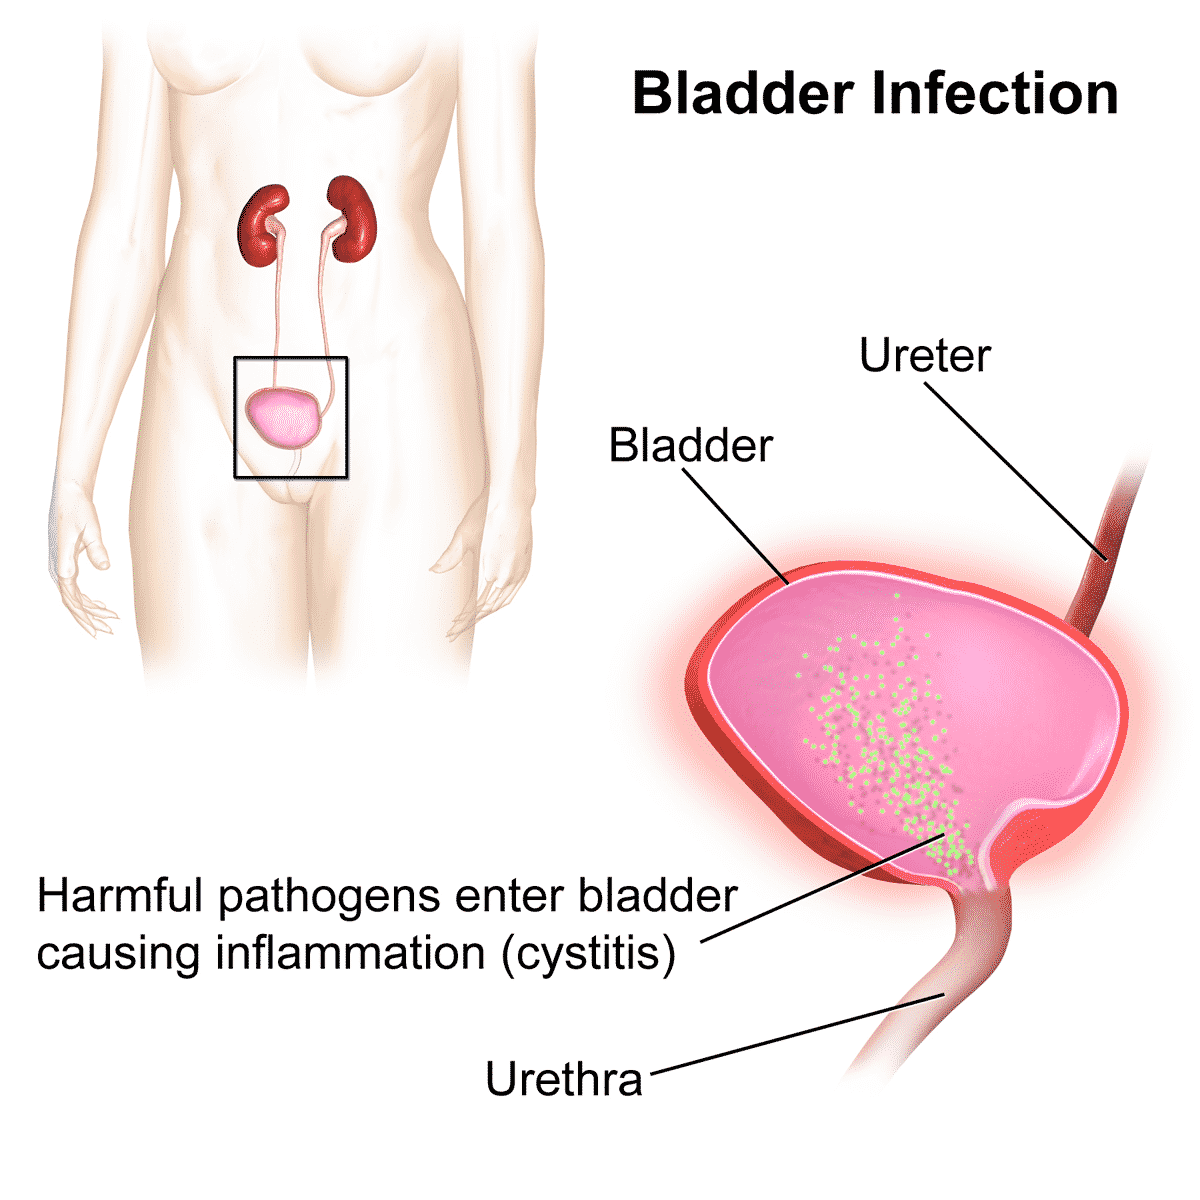 5 Things You Should Know About Urinary Infections